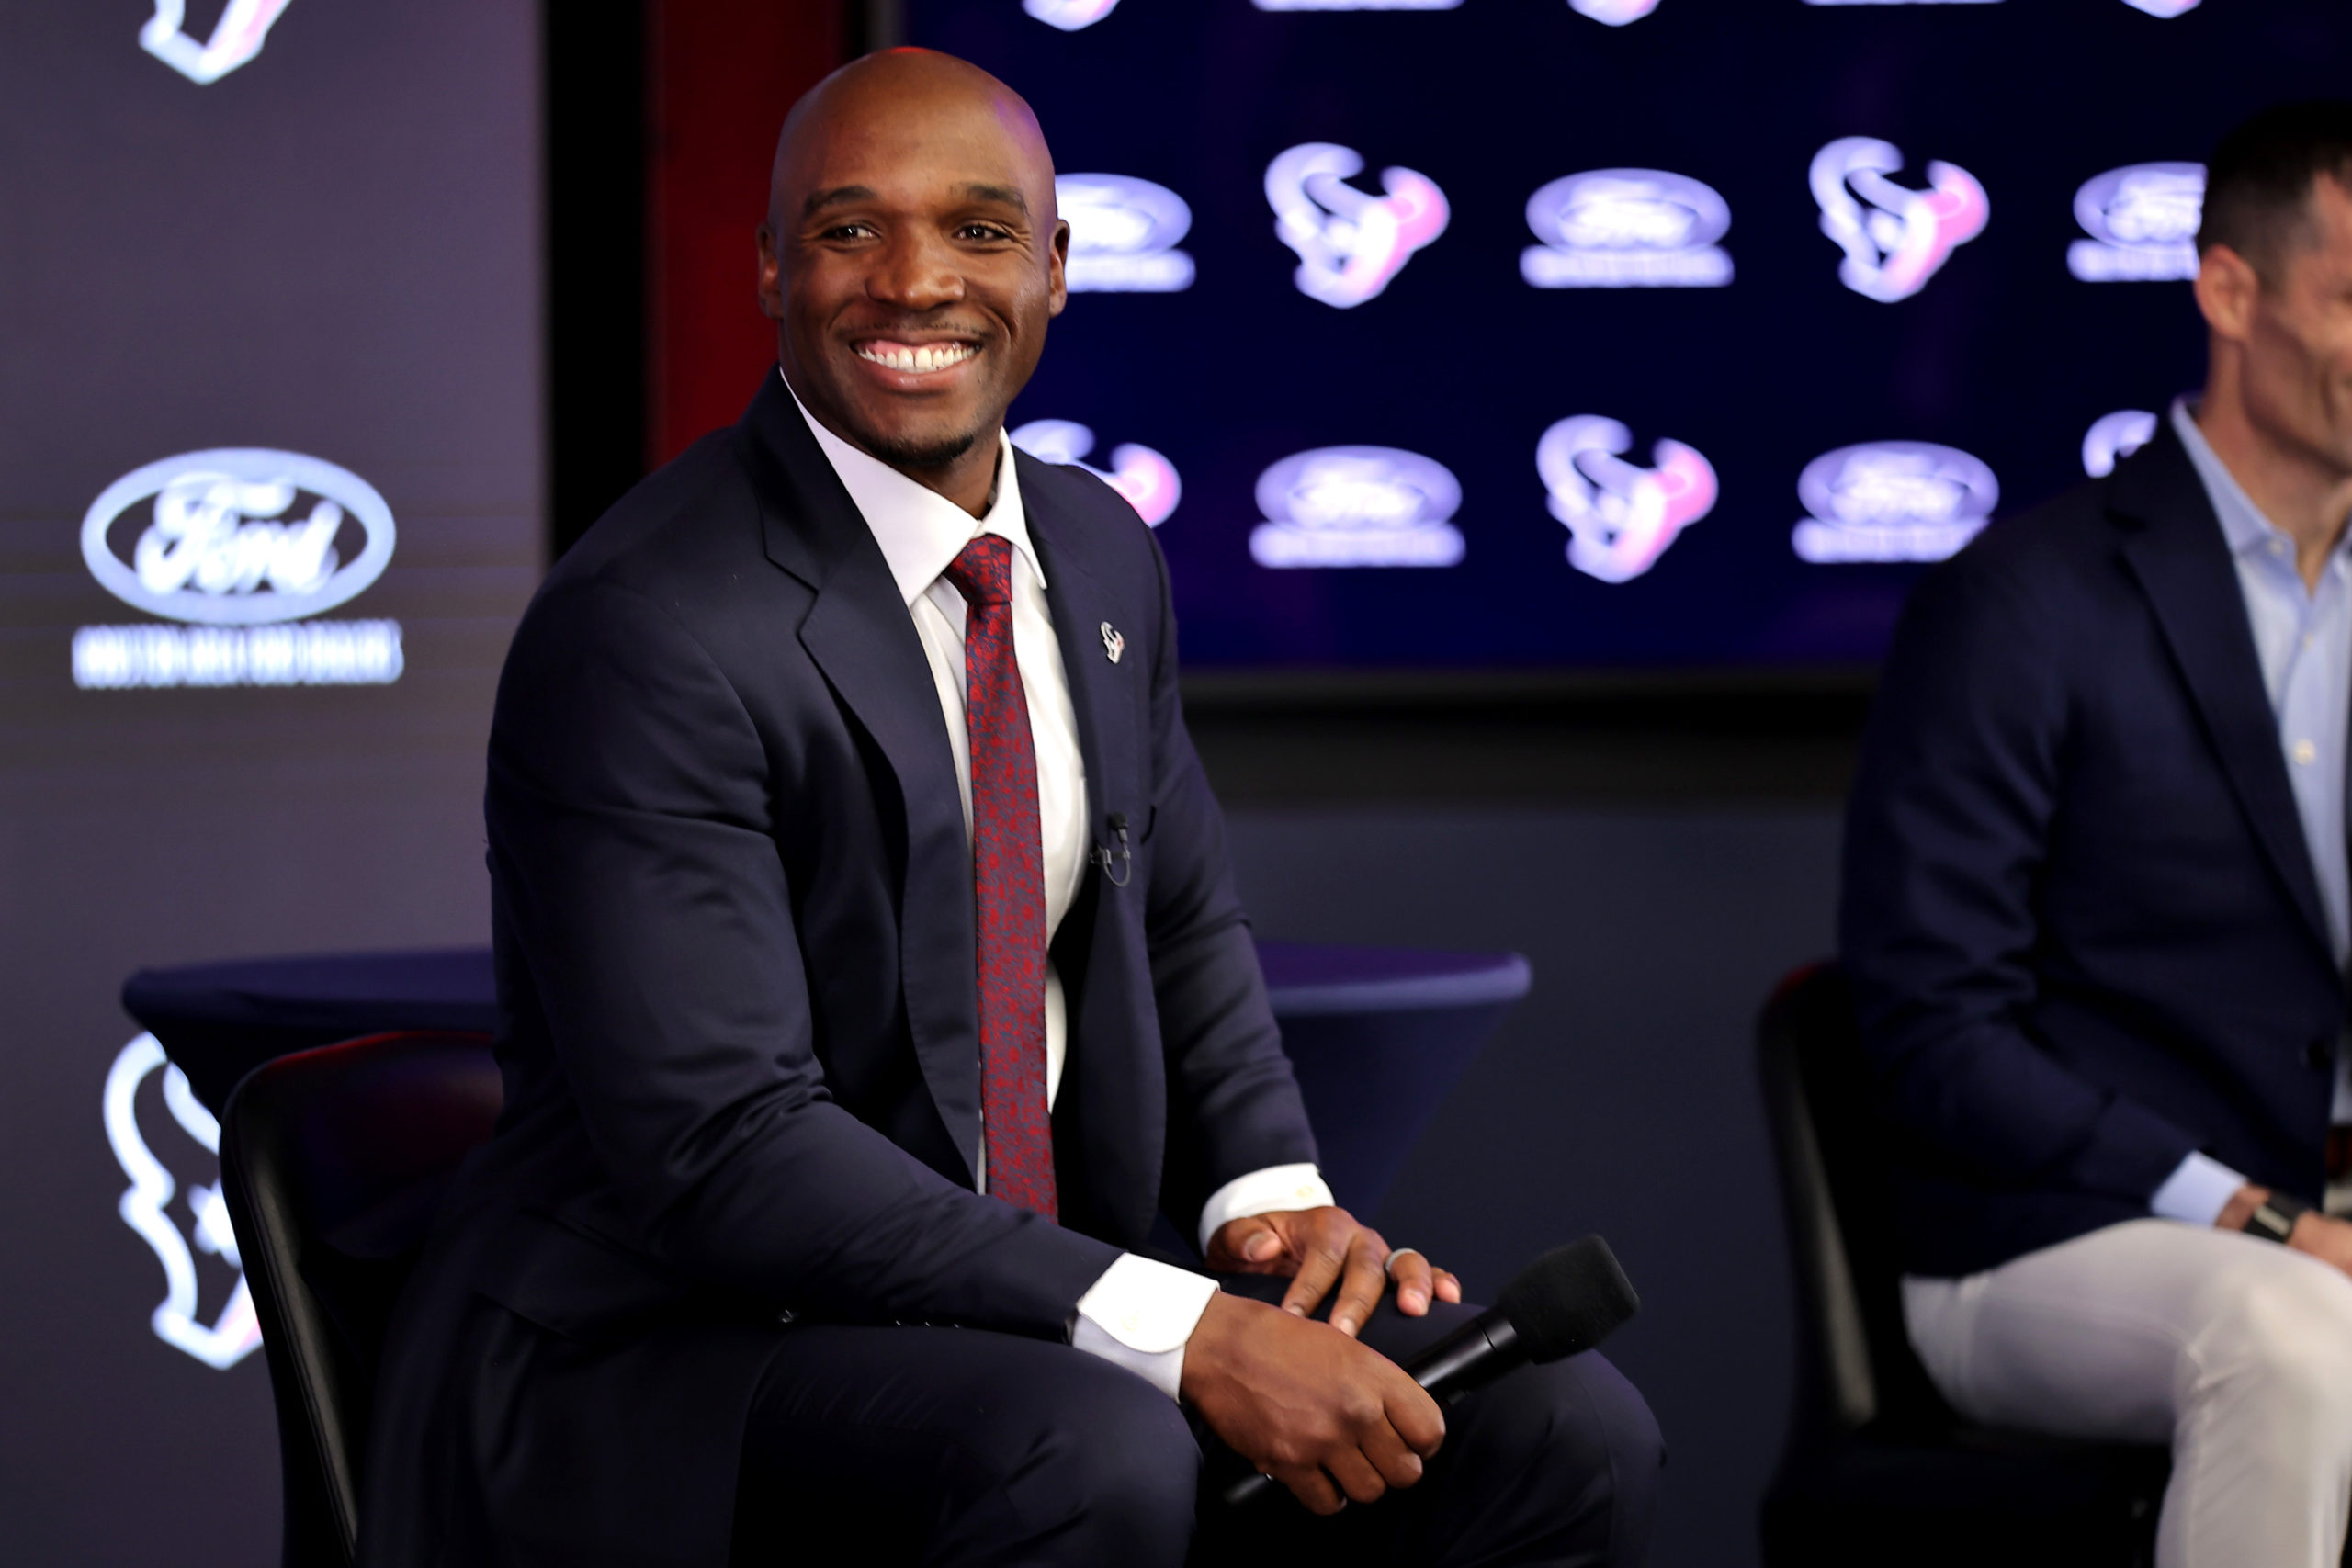 Ryan Ryans Porn - New Texans Head Coach: 'Jesus Christ is Who Matters Most' - Daily Citizen